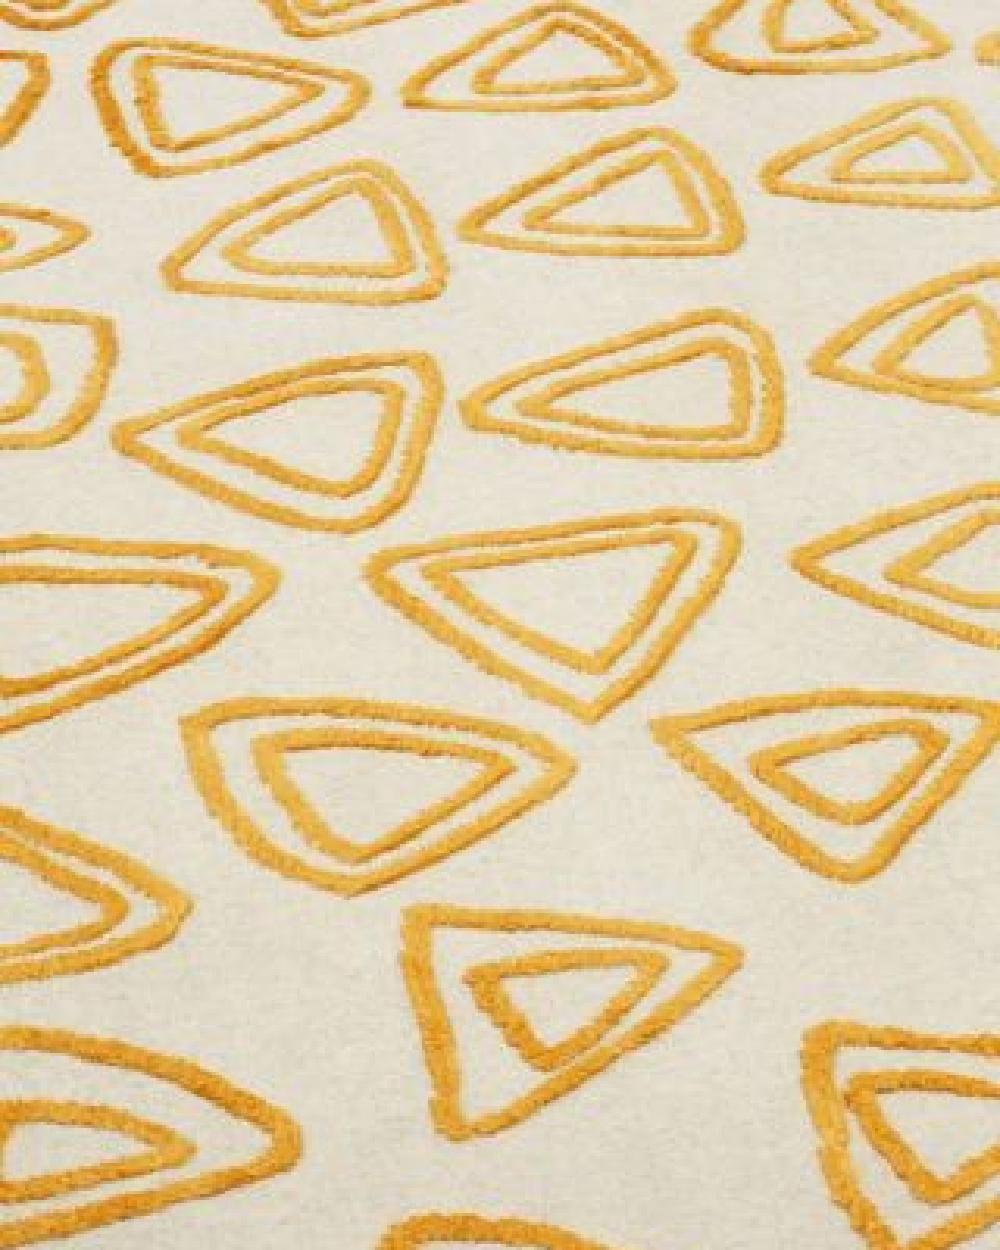 Contemporary cc-tapis NAÏF TRIANGLES handmade rug in wool by David/Nicolas - IN STOCK For Sale